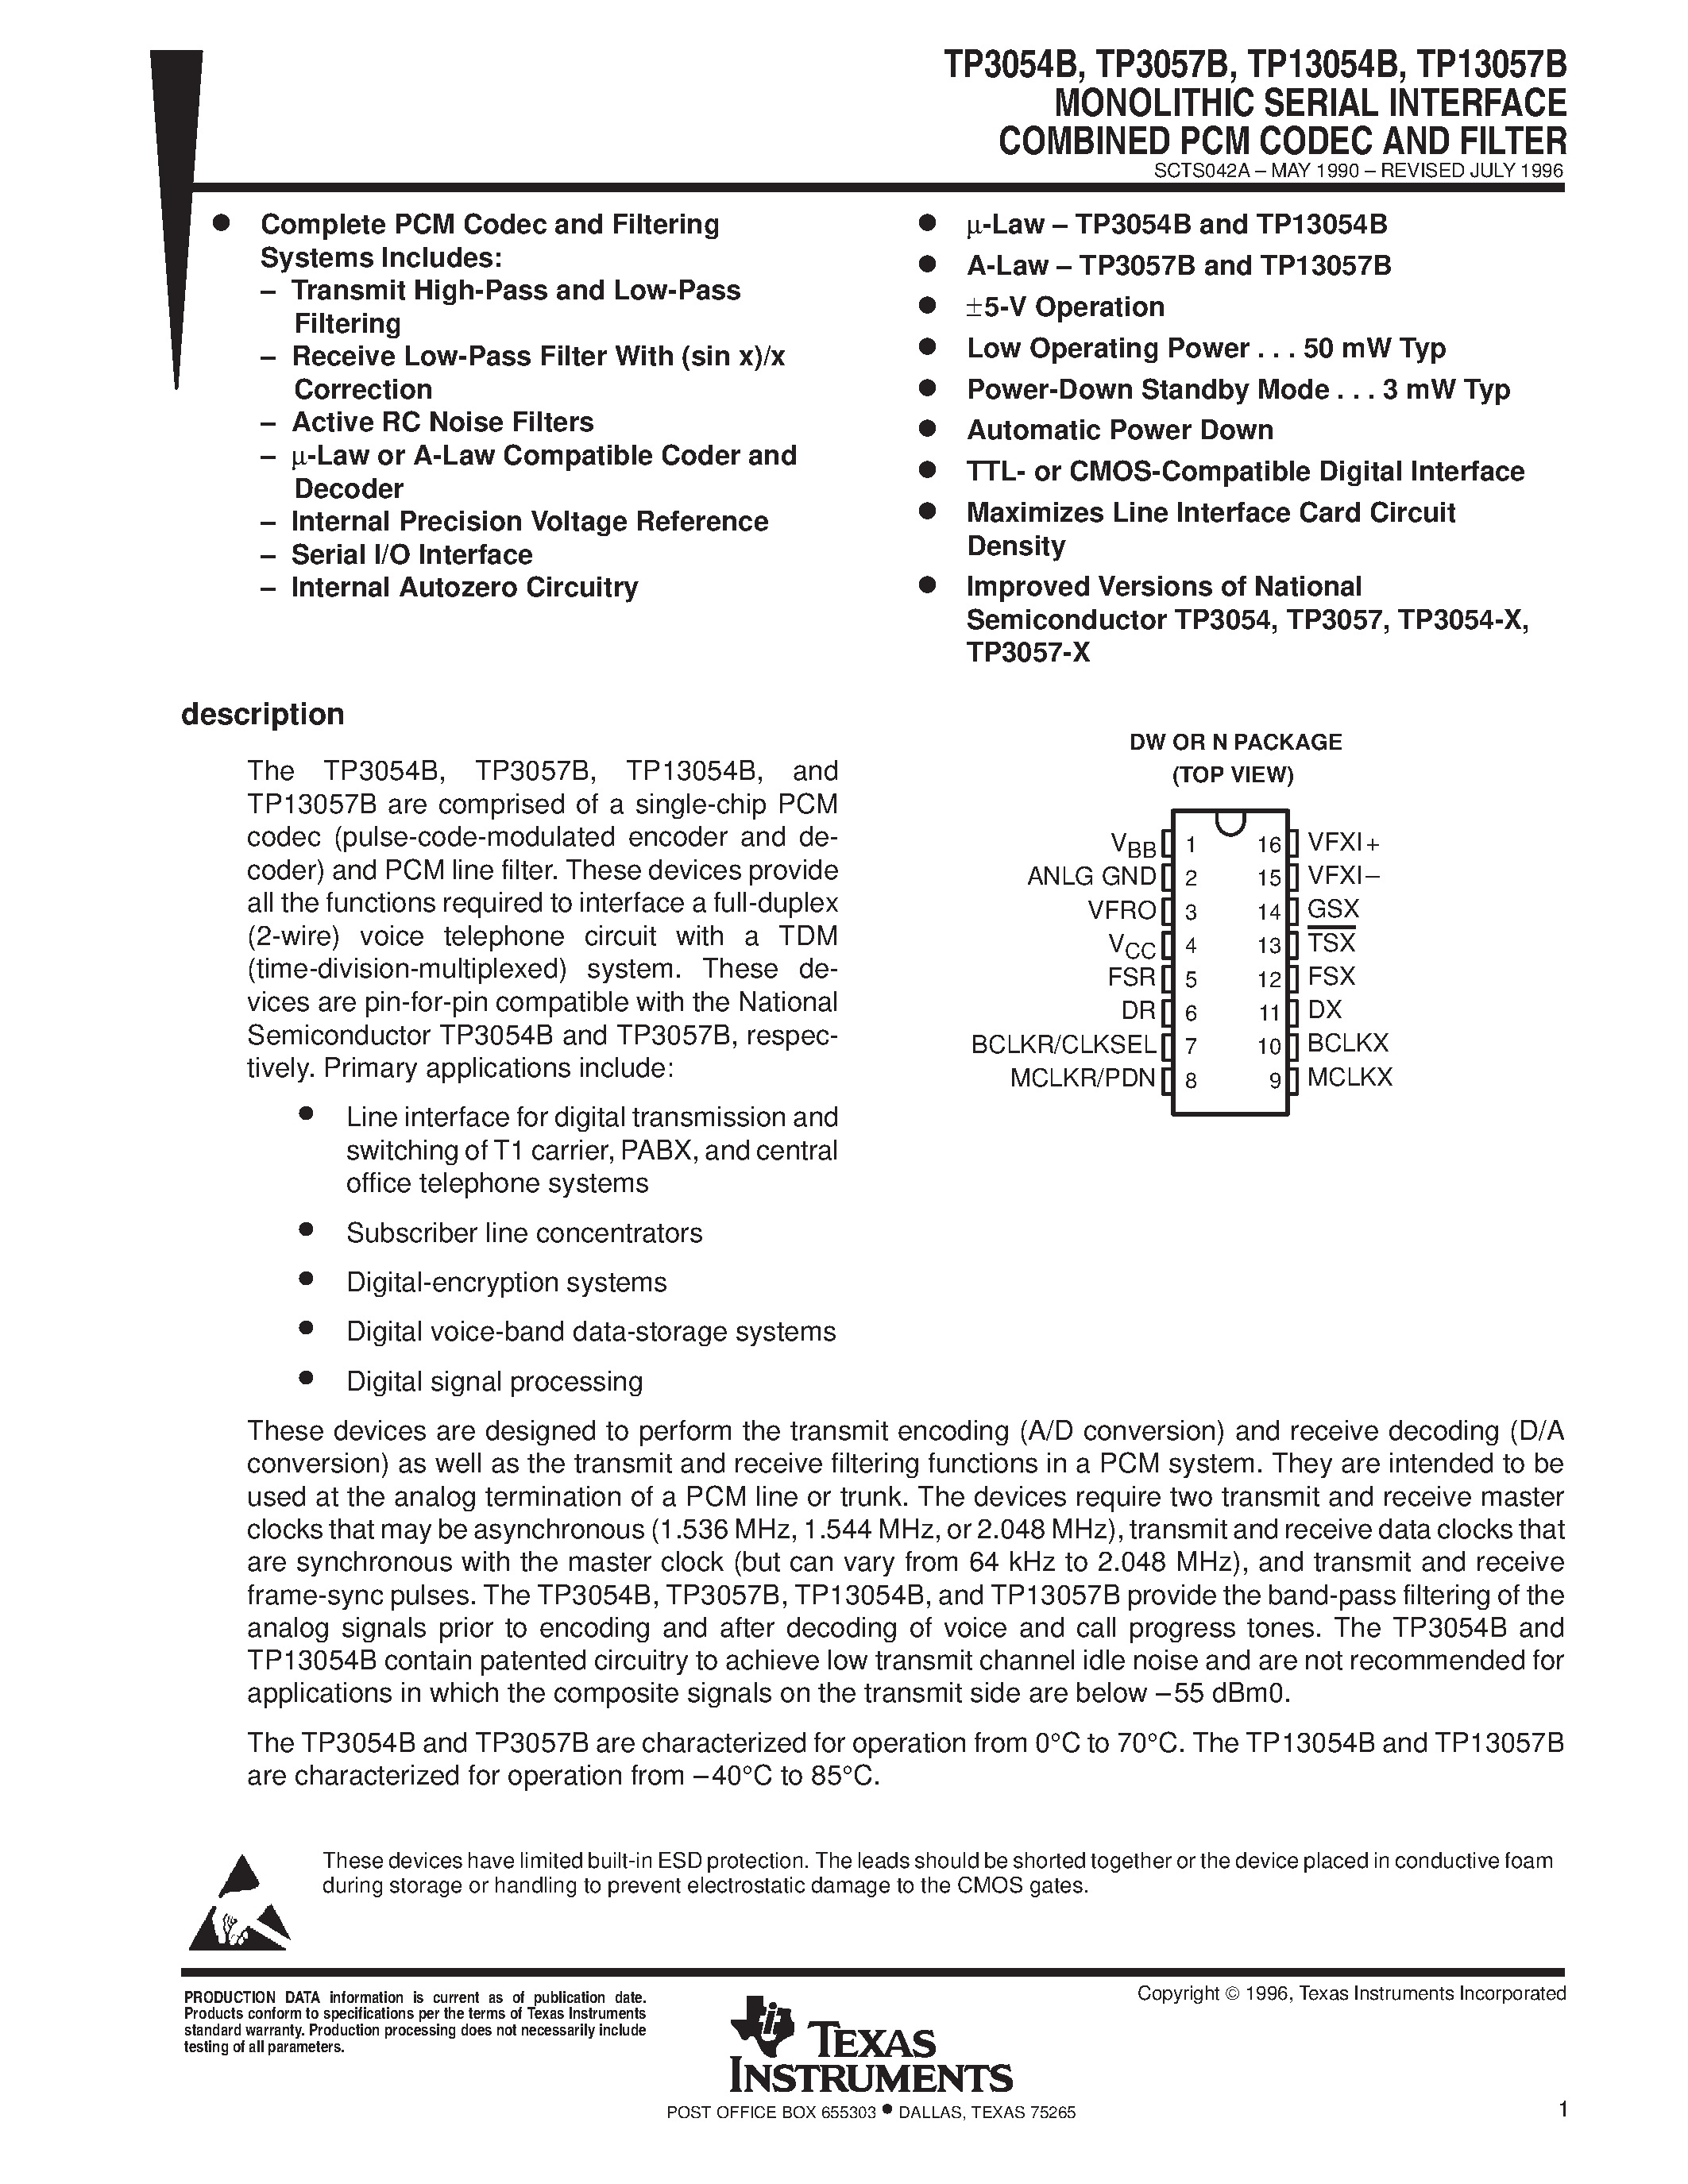 Datasheet TP13054BDW - MONOLITHIC SERIAL INTERFACE COMBINED PCM CODEC AND FILTER page 1